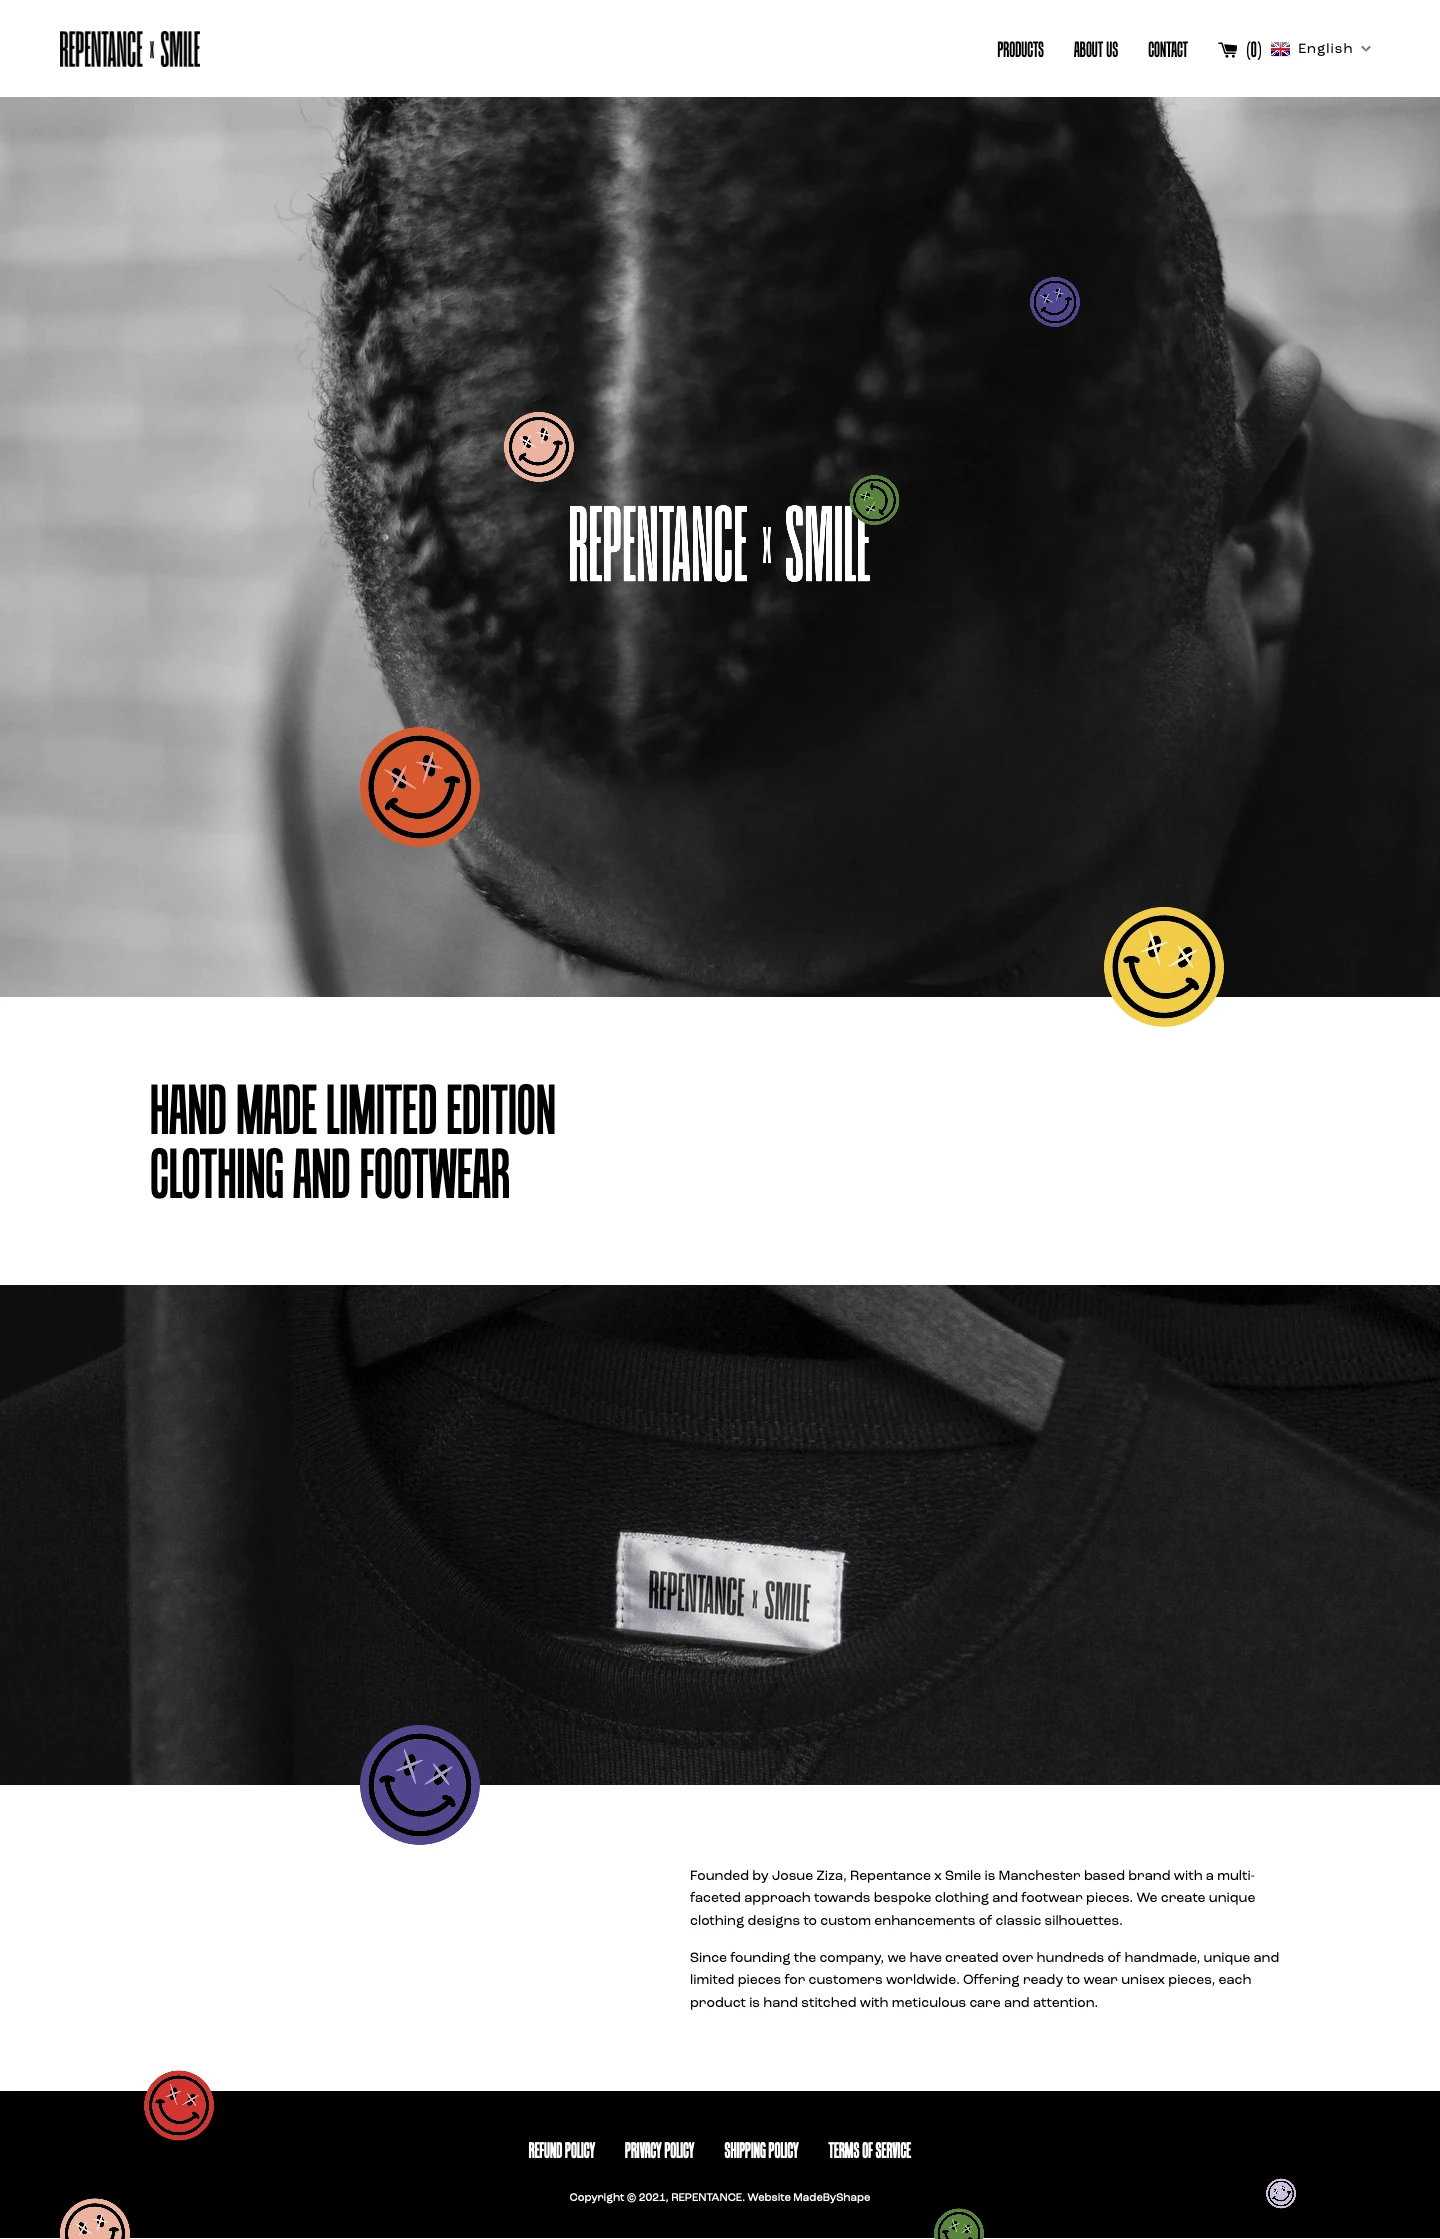 REPENTANCE Landing Page Example: Founded by Josue Ziza, Repentance x Smile is a Manchester based brand with a multi-faceted approach towards bespoke clothing and footwear pieces. We create unique clothing designs to custom enhancements of classic silhouettes.  Since founding the company, we have created hundreds of handmade, unique and limited pieces 